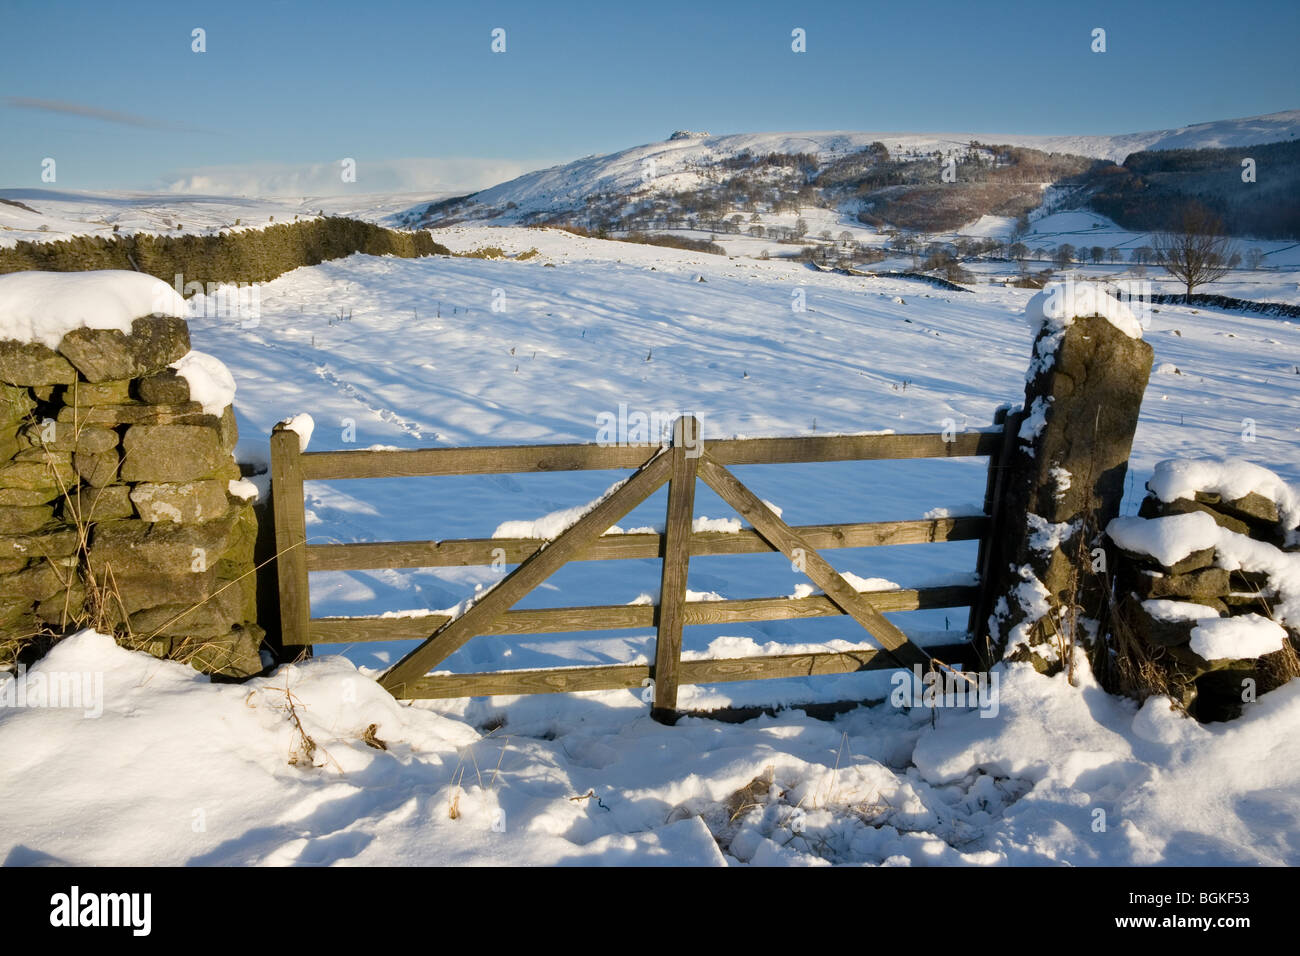 A wintry view of Simon's Seat, from near the hamlet of Drebley, close to Bolton Abbey in Upper Wharfedale, North Yorkshire Stock Photo